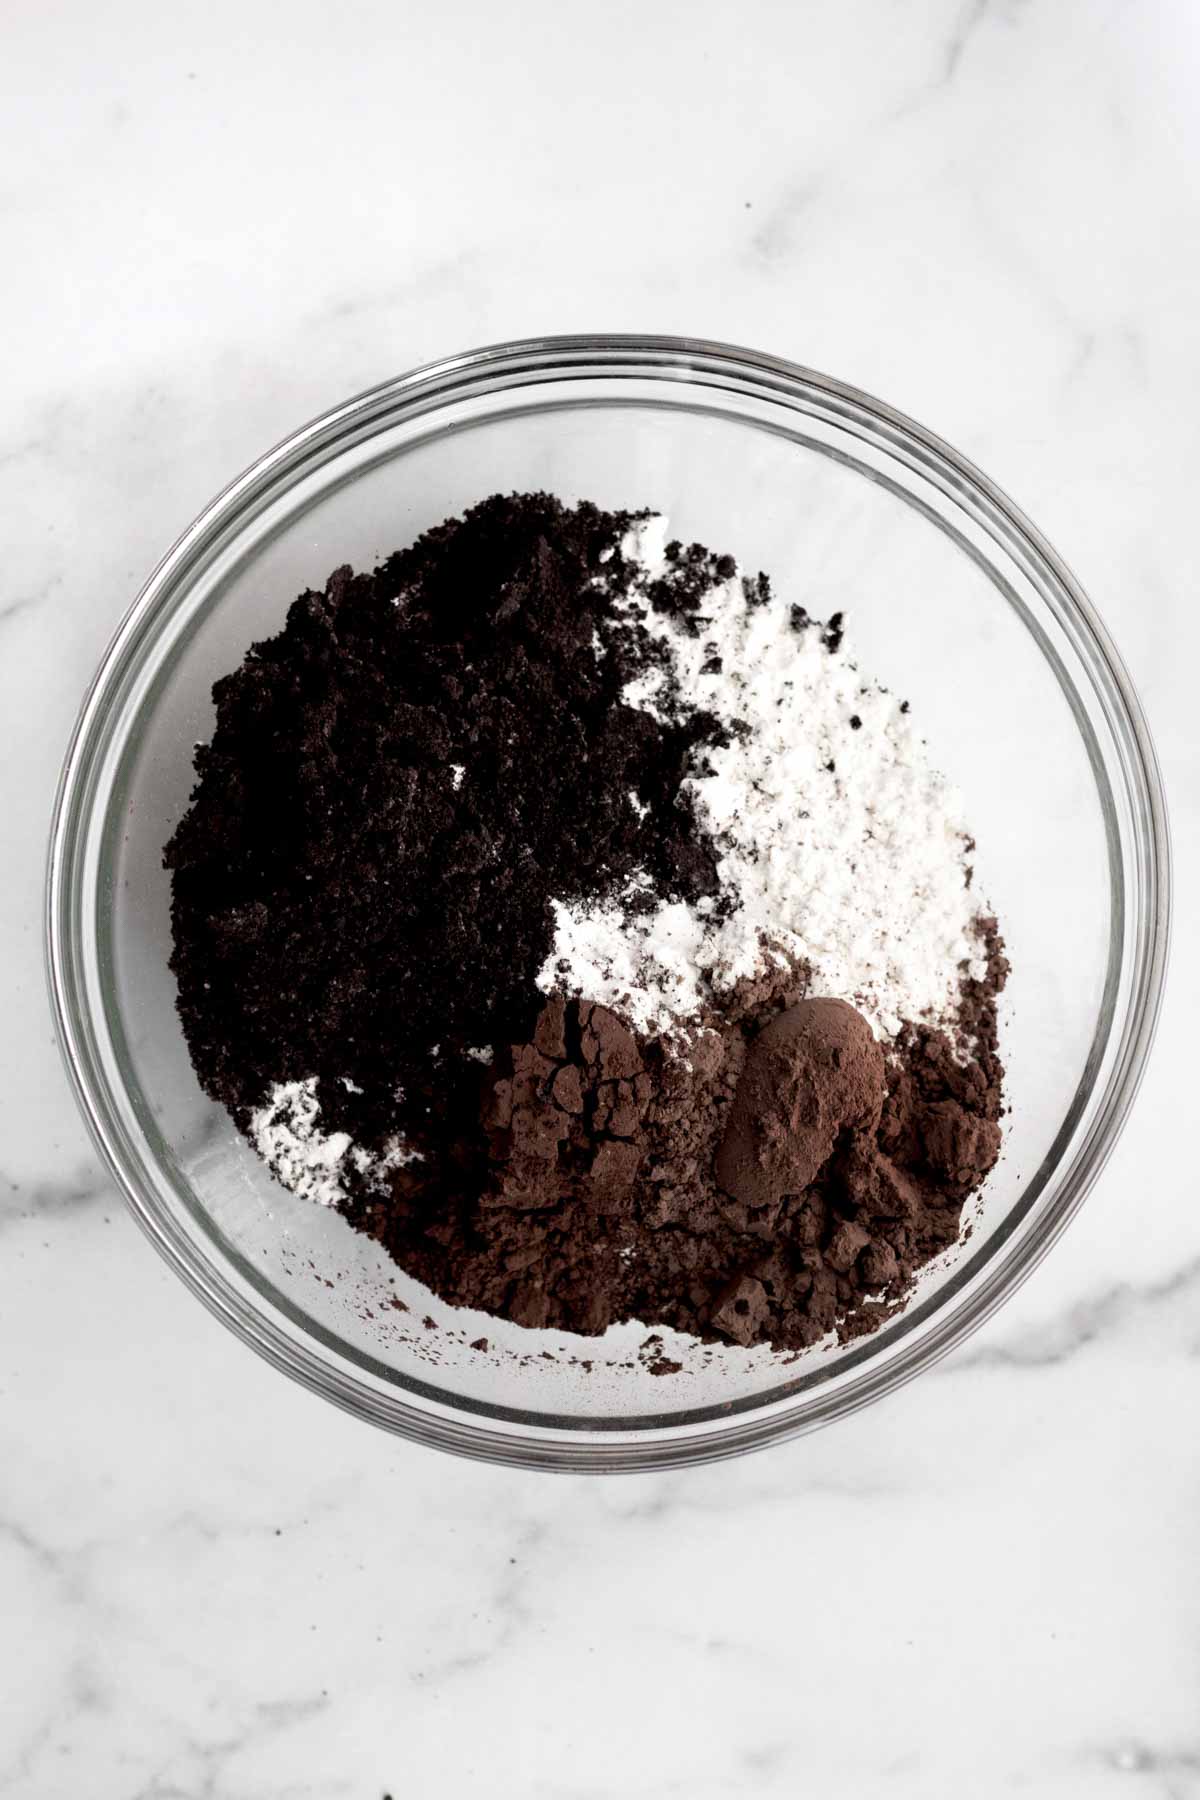 The unmixed black, brown and white dry ingredients in a glass bowl.